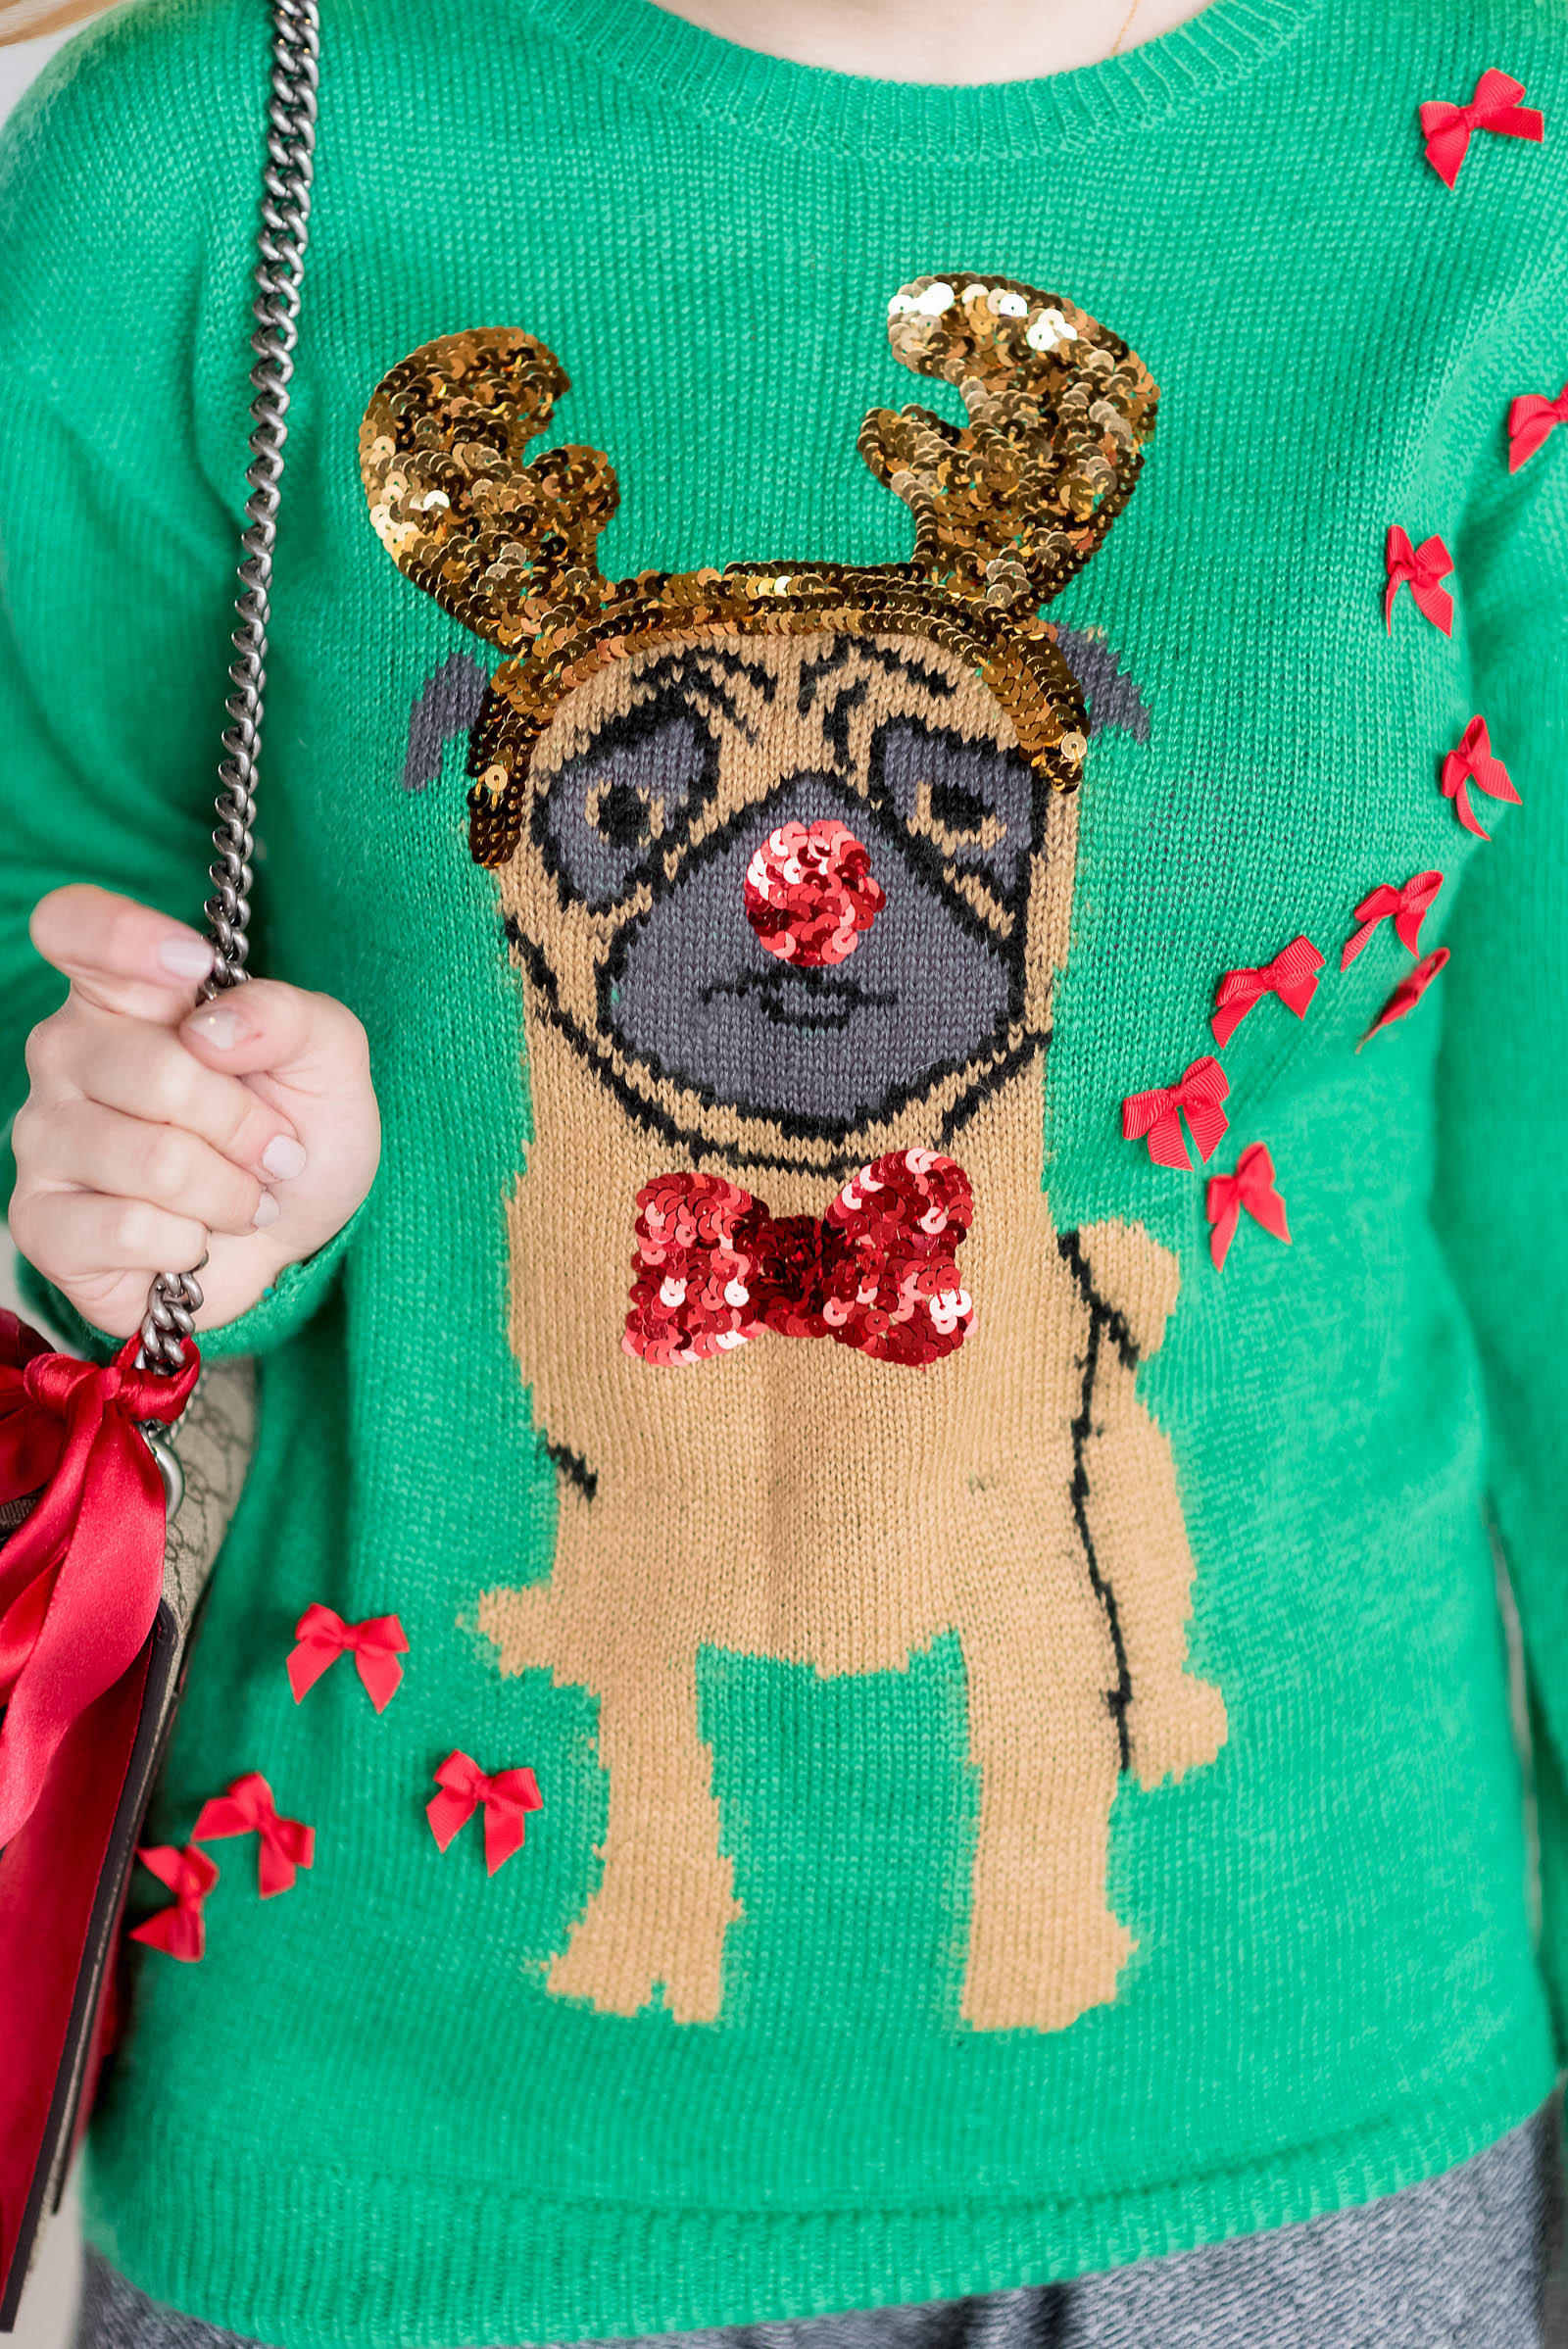 How to Style An Ugly Christmas Sweater